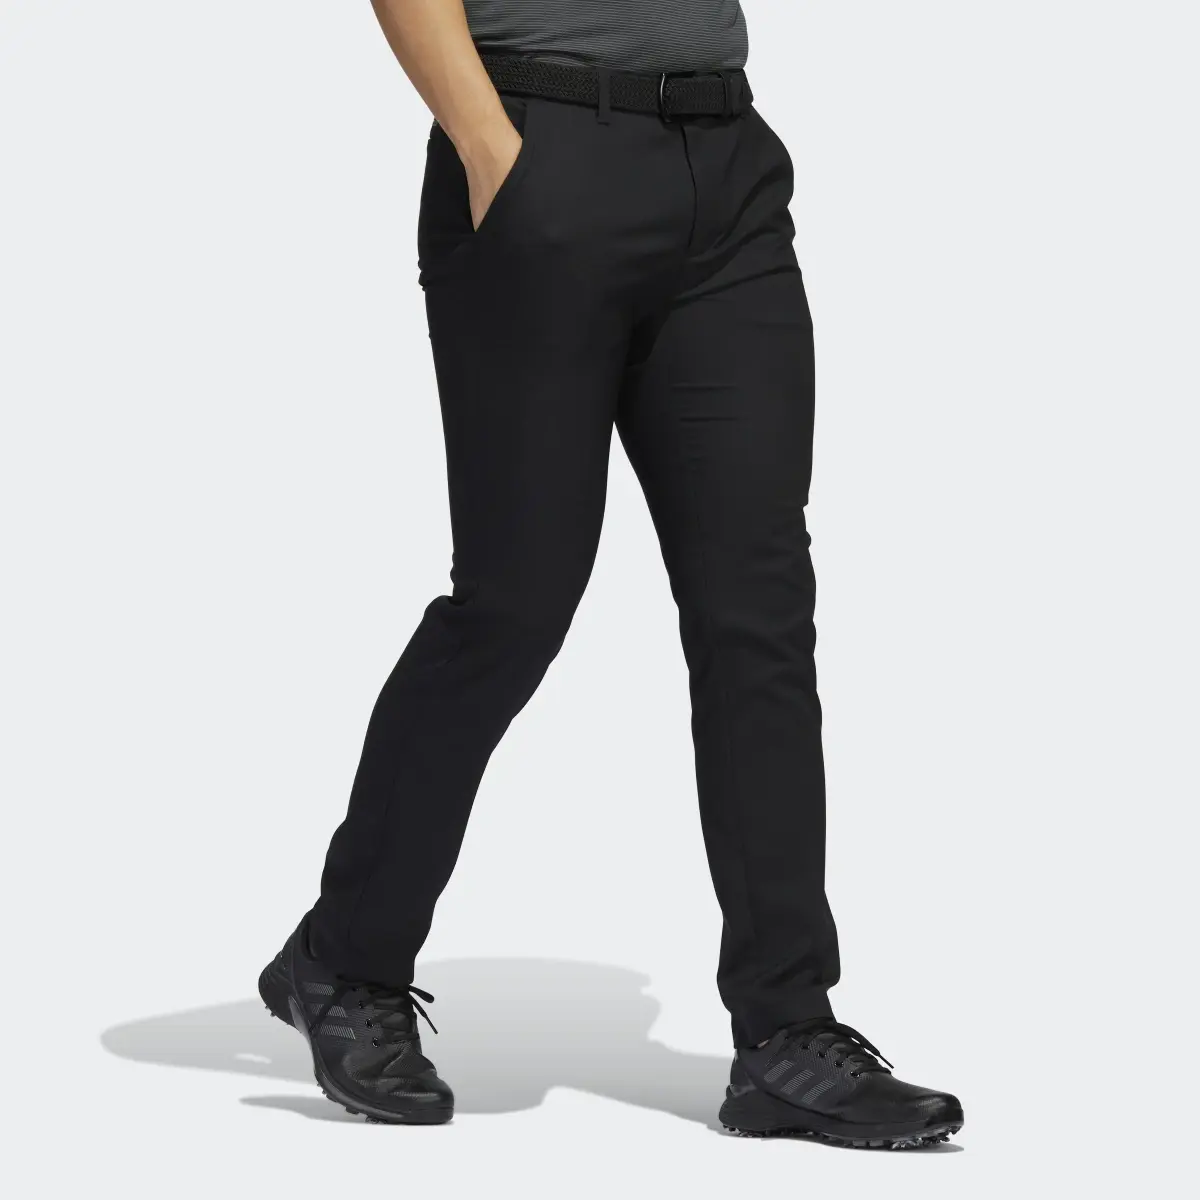 Adidas Ultimate365 Tapered Pants. 3